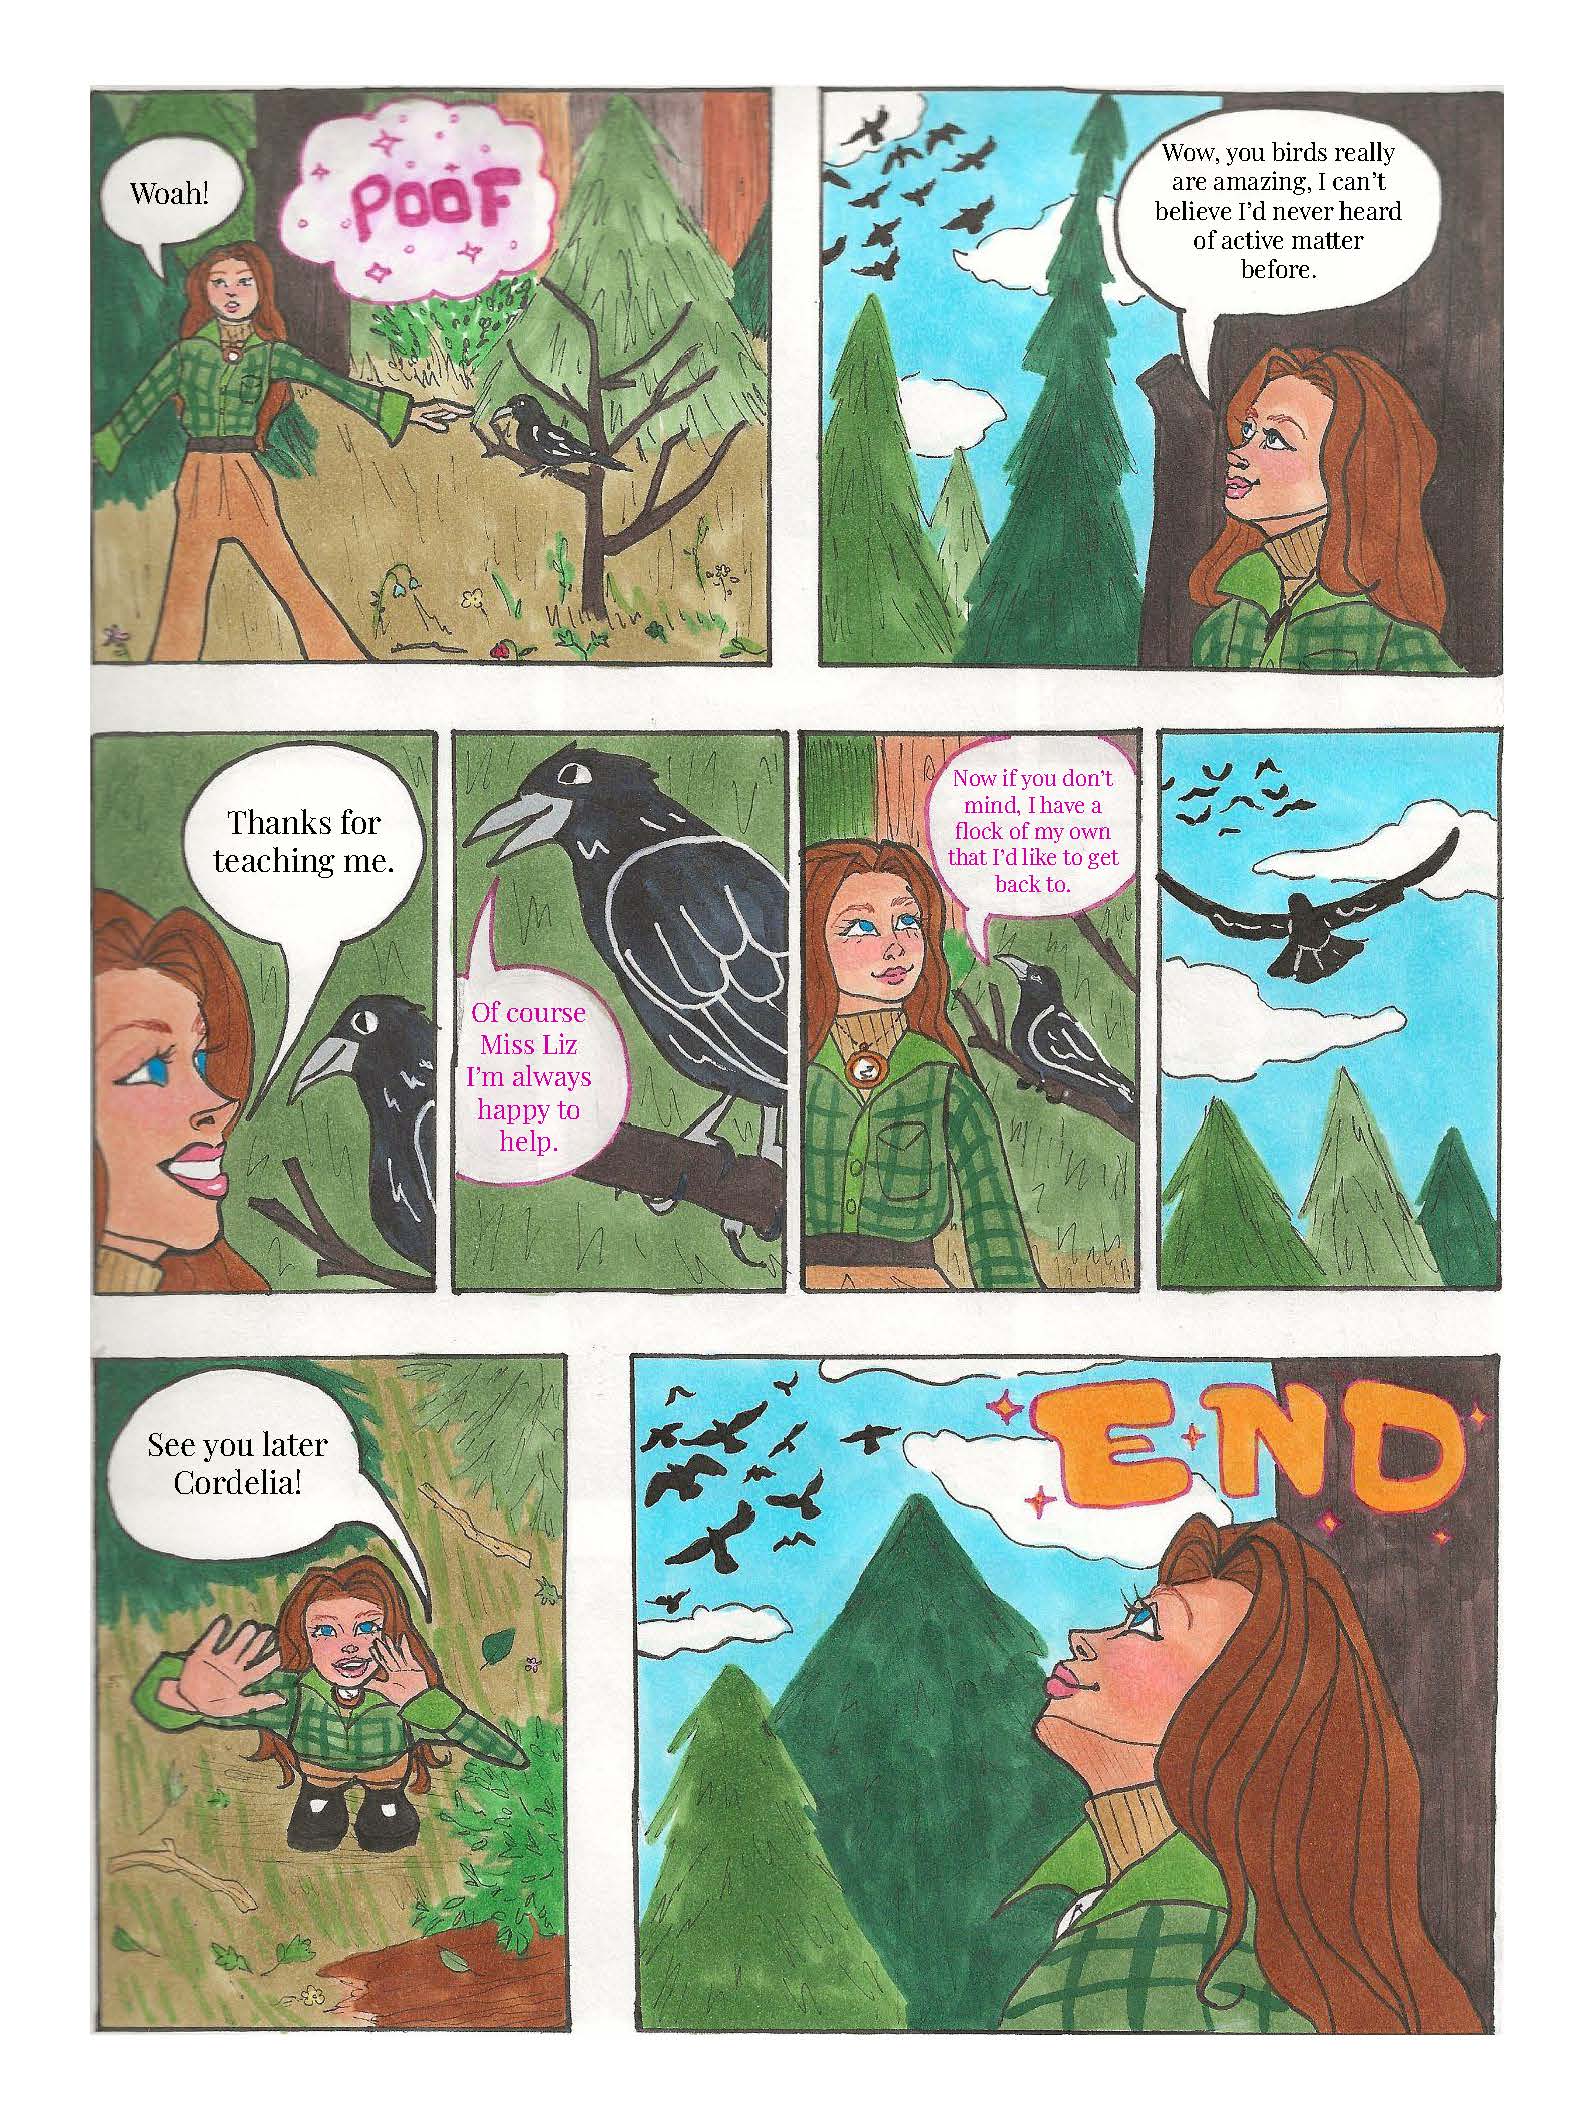 Flocking birds and active matter page 9